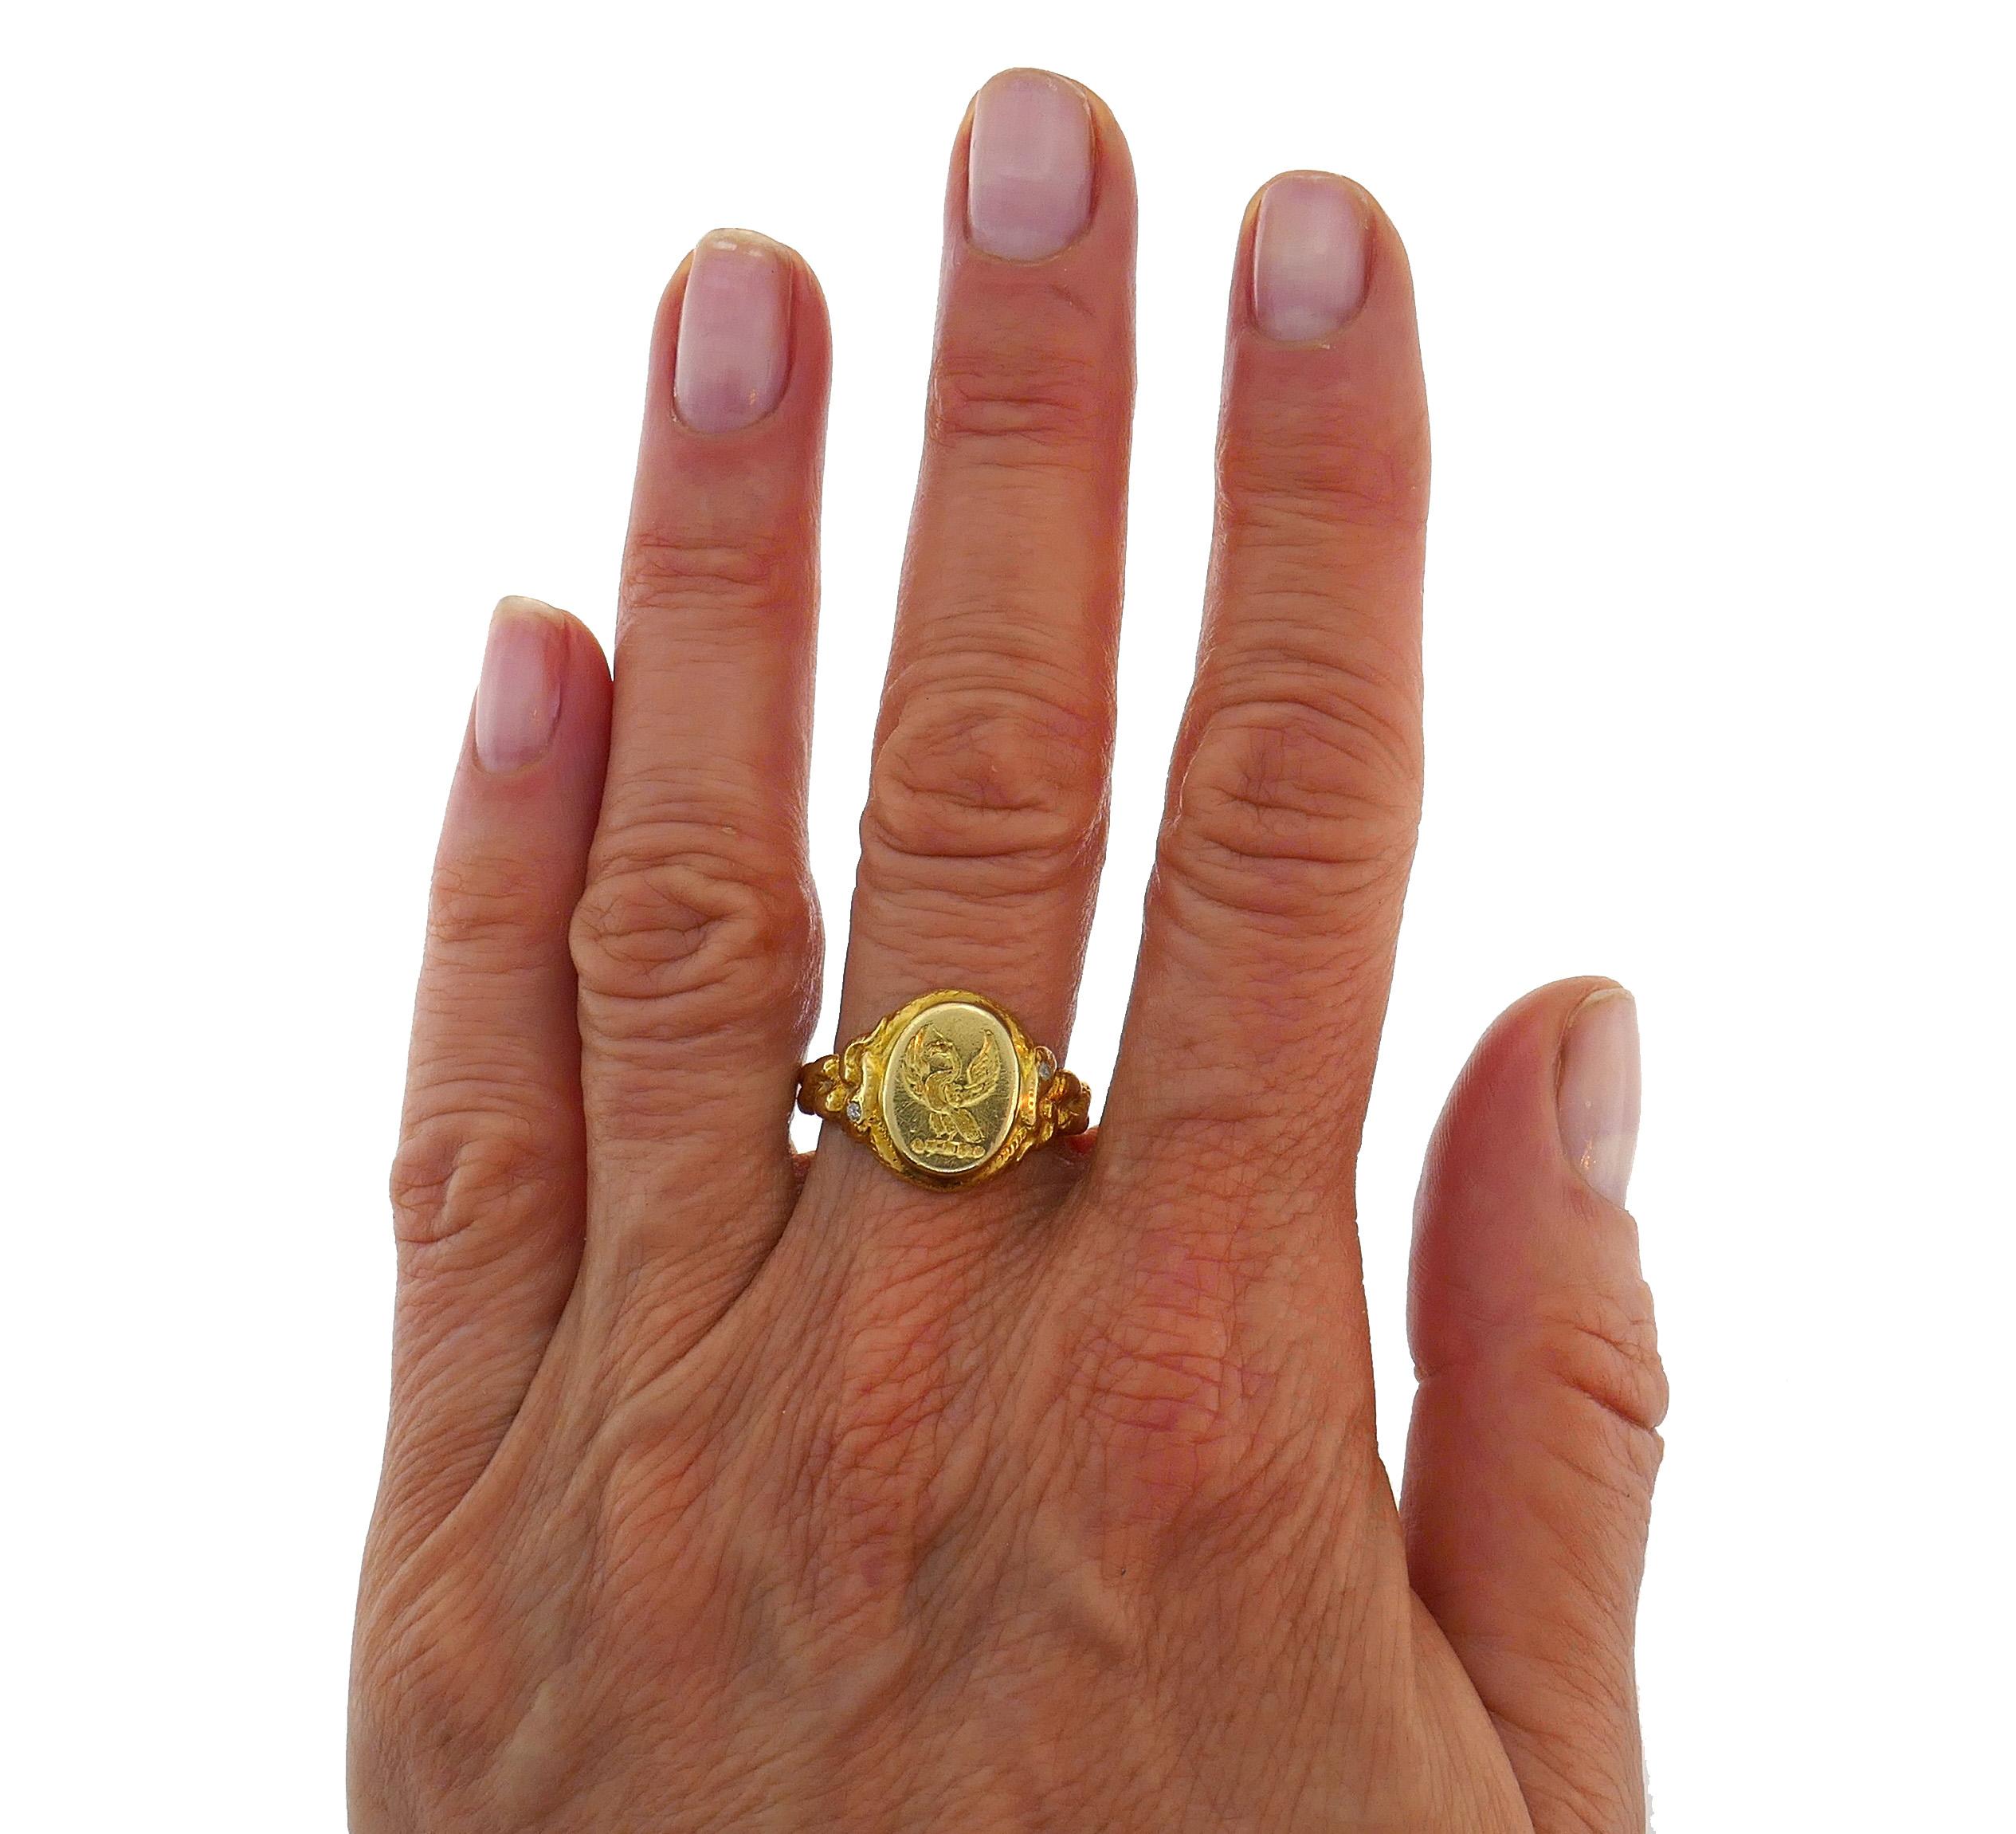 Gorgeous signet ring made of 14k yellow gold and accented with two Old European cut diamonds. 
Measurements: 9/16 x 1/2 inch (1.5 x 1.3 cm).
Weight 8.0 grams. 
The ring size is 9 (sizable). 